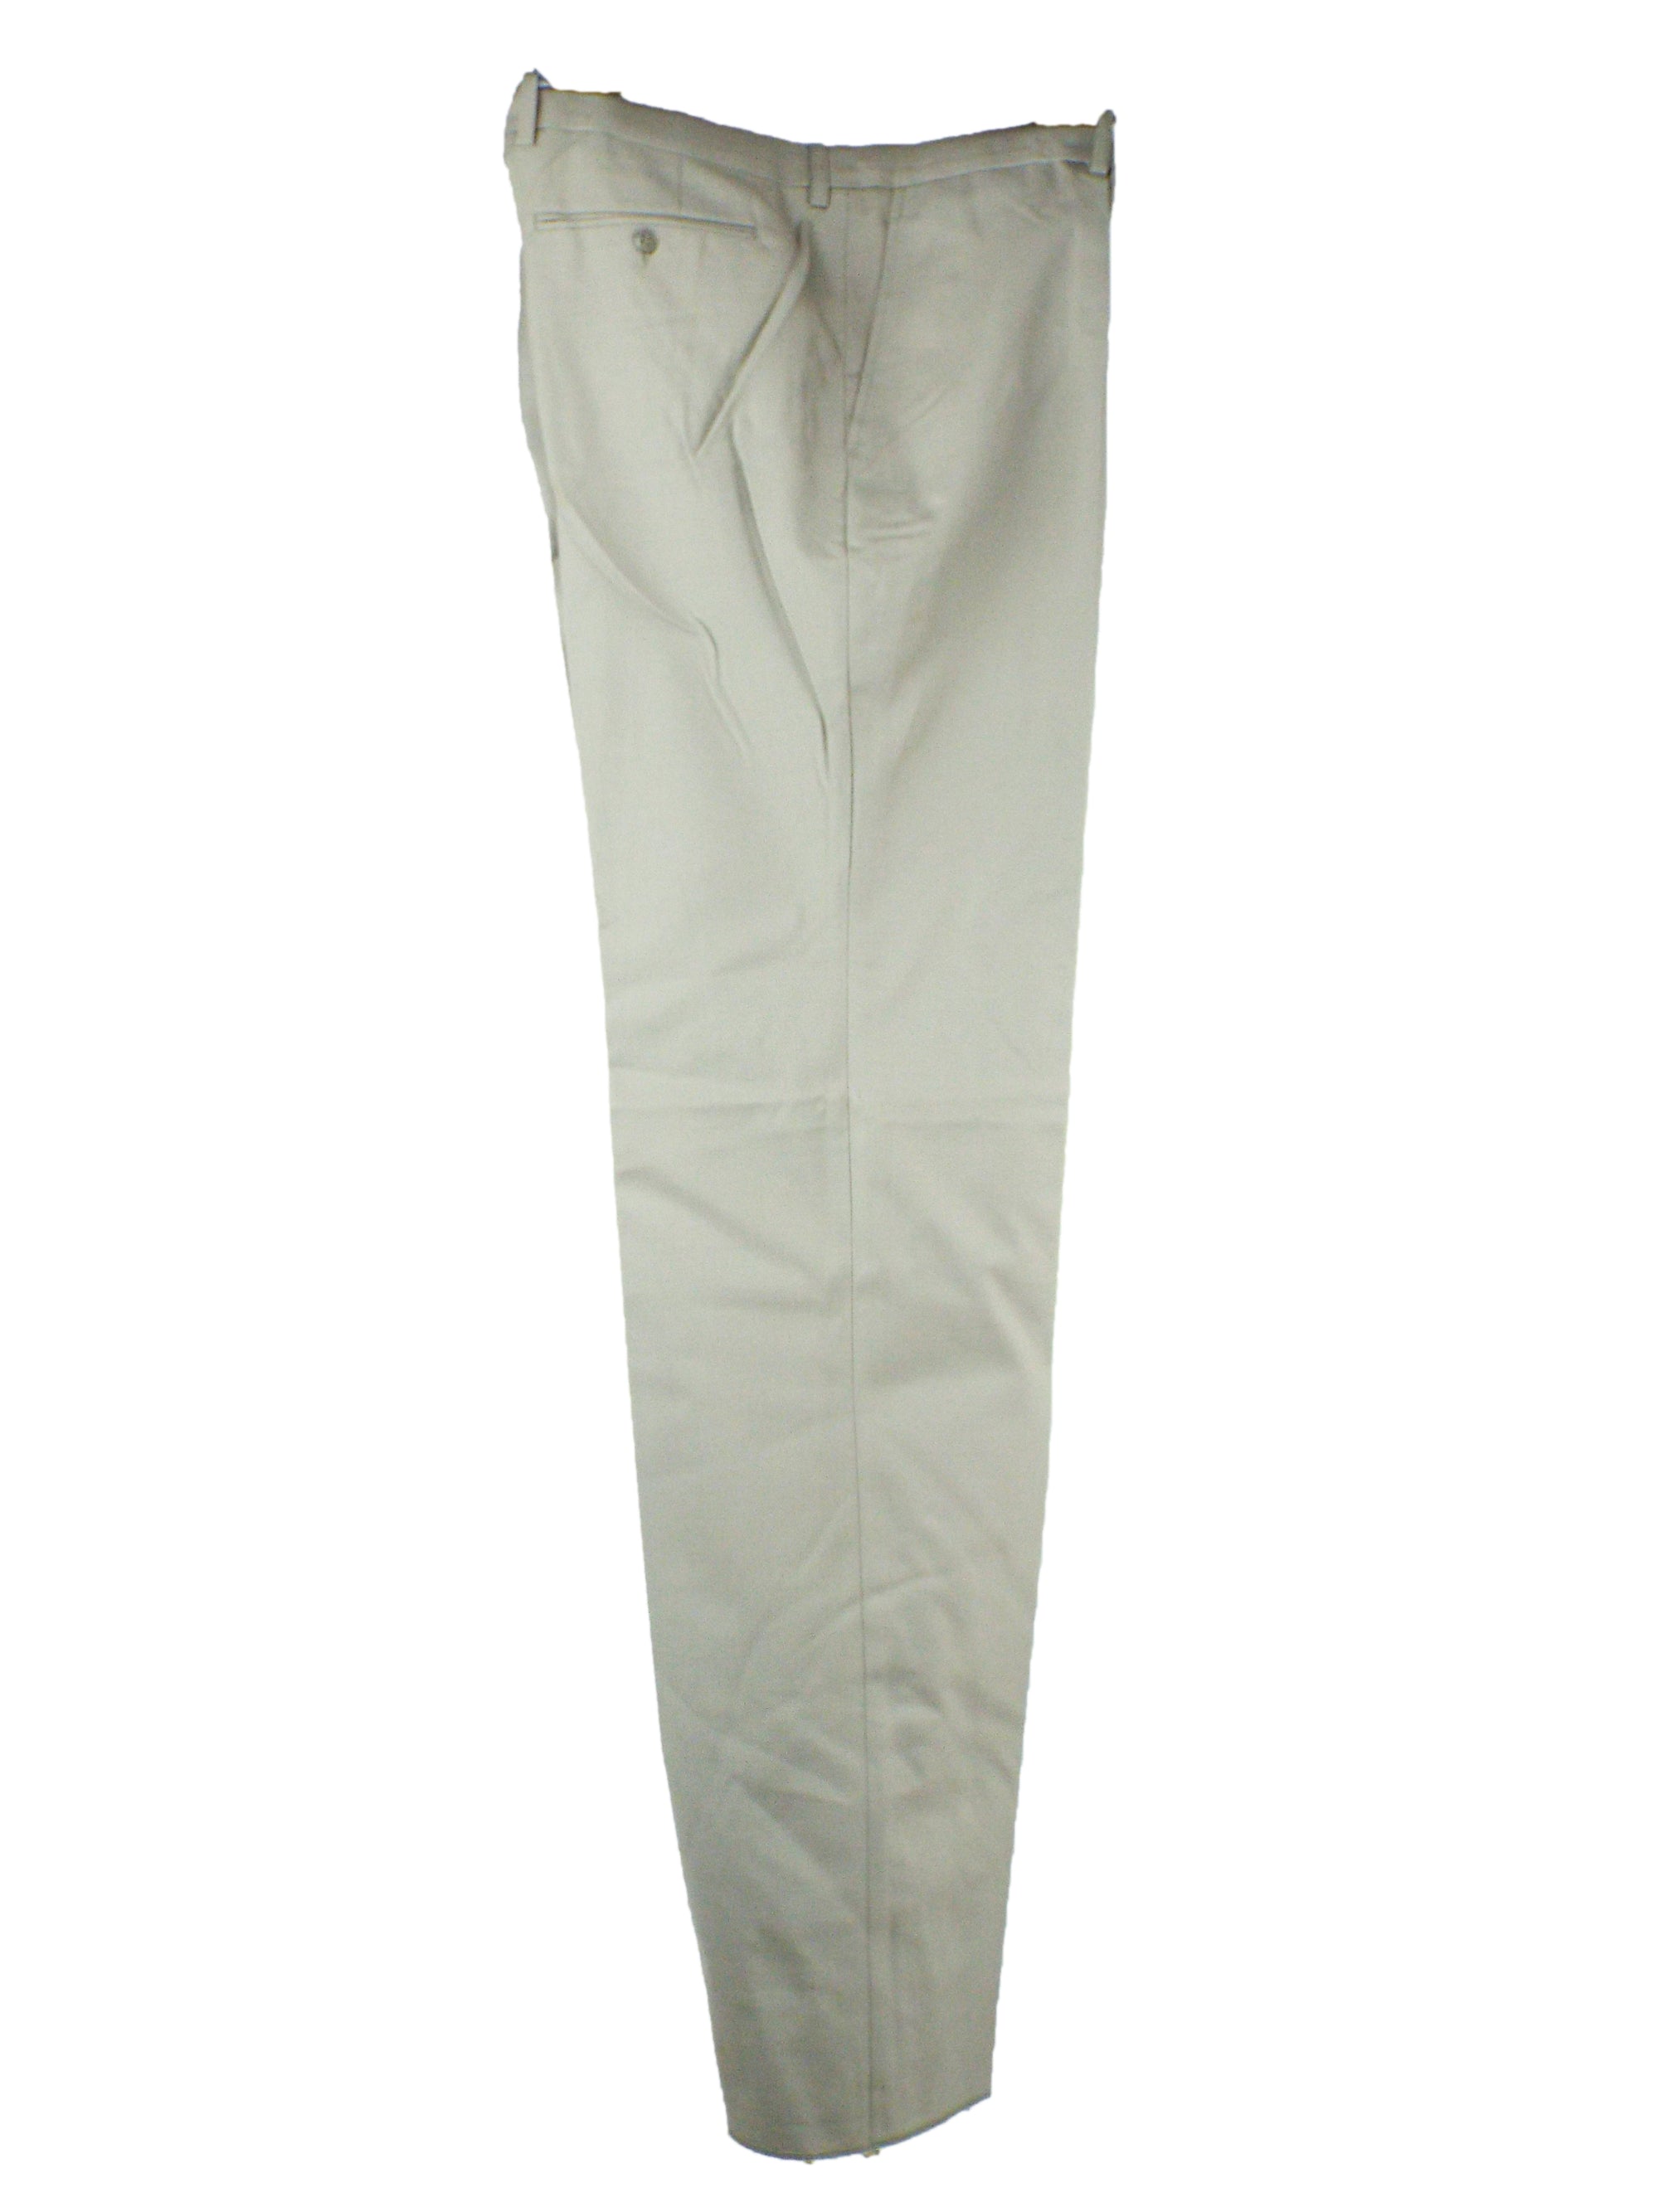 French Military - Chino Dress Uniform Trousers - TDF (Terre de France)